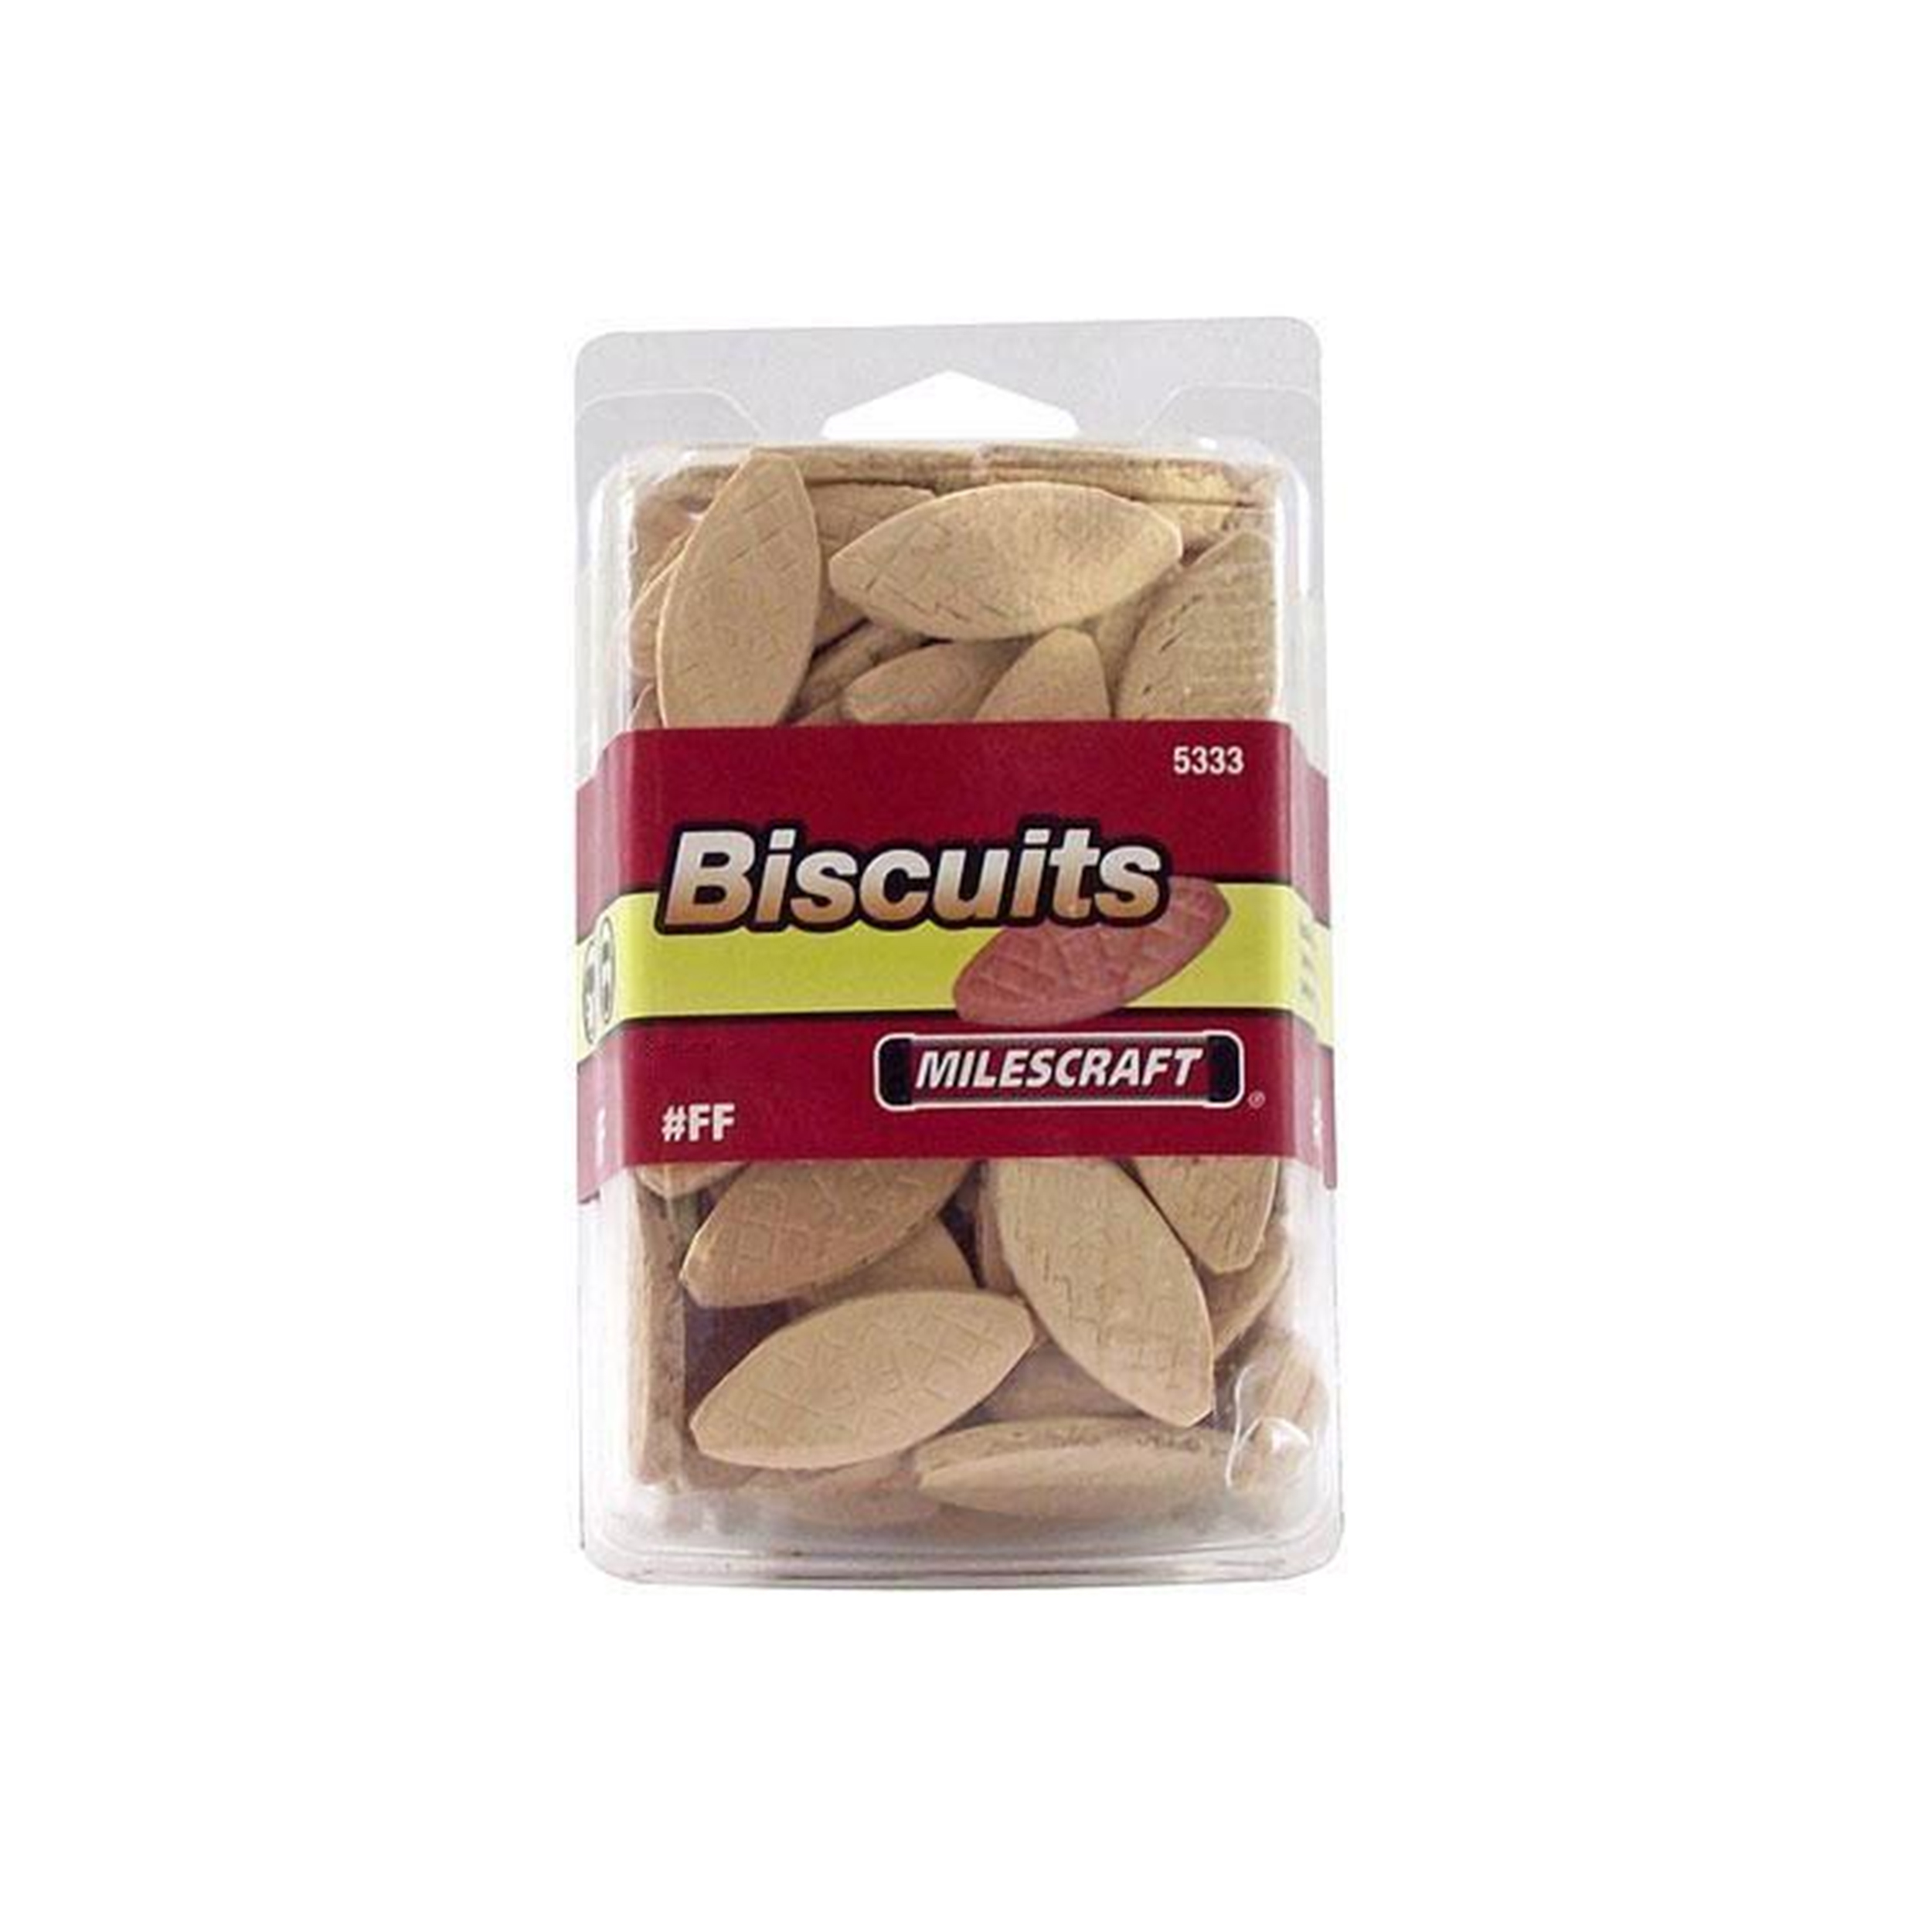 40-count #ff Biscuits